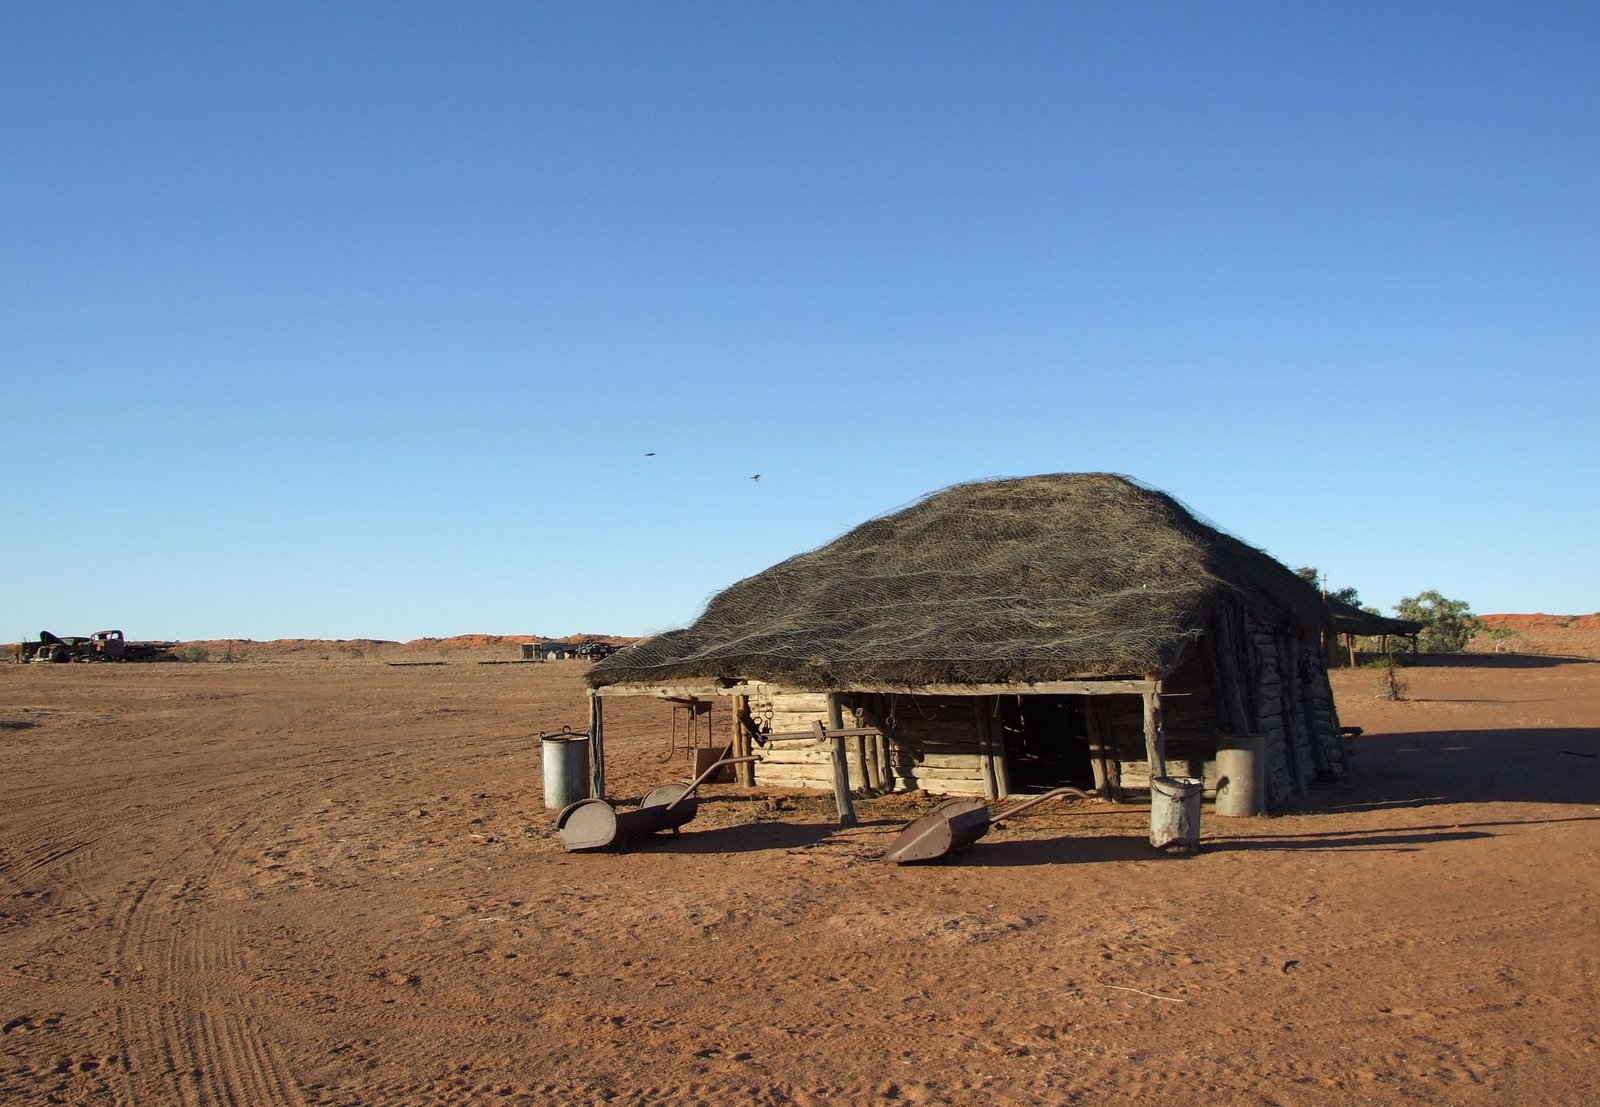 an old, thatched building with a few wheels in a desert area